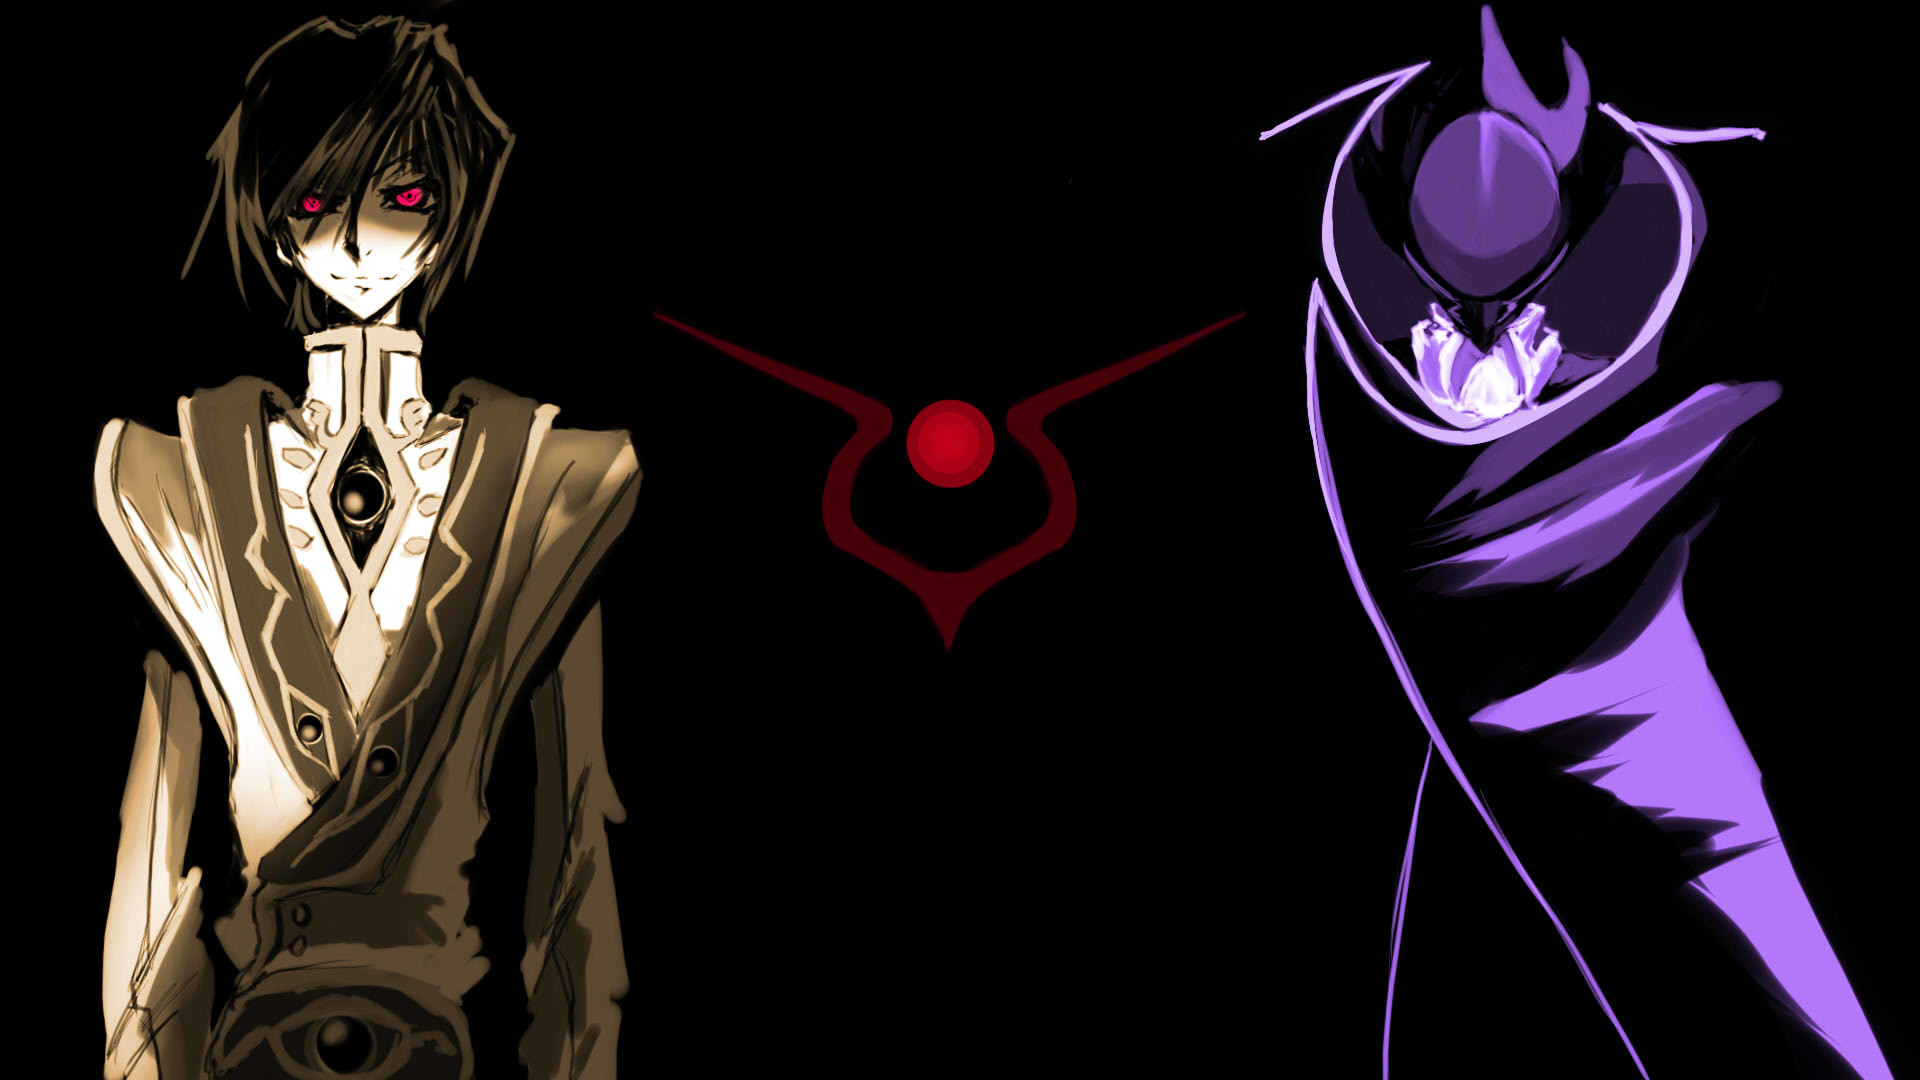 1920x1080 Code Geass Wallpapers High Quality | Download Free